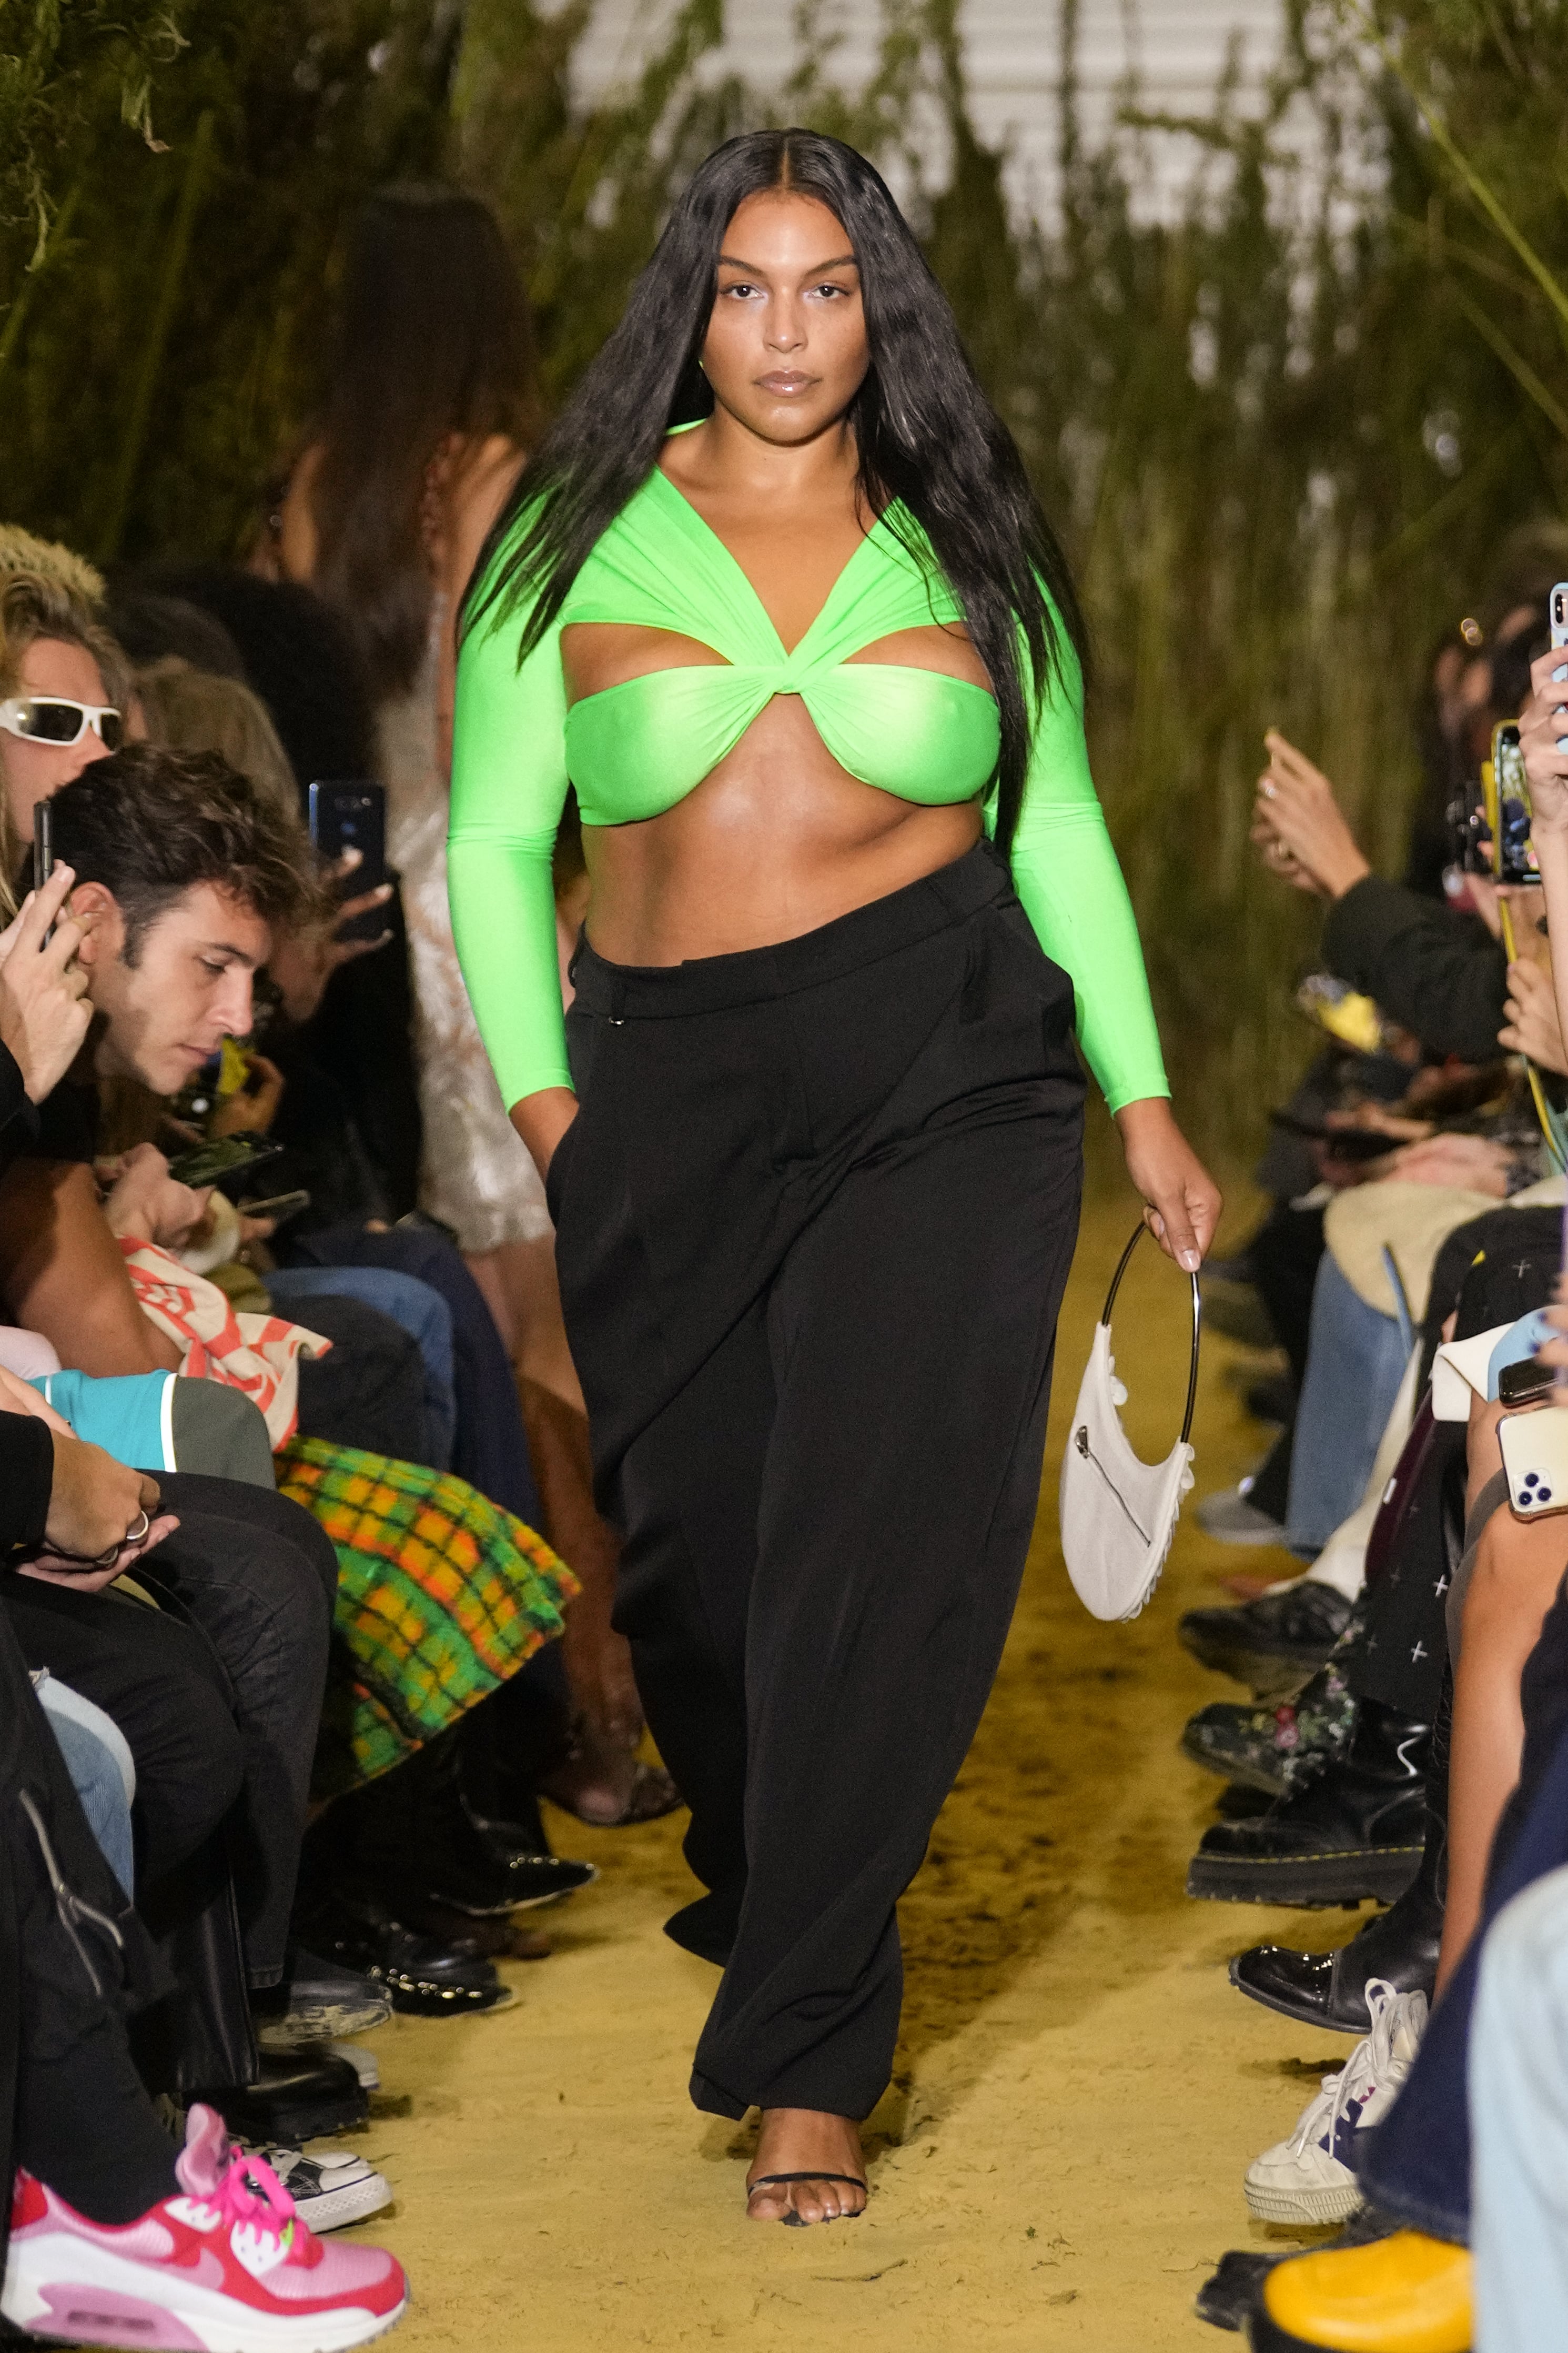 Plus Size Models Disappearing Off NYFW Runways Shows